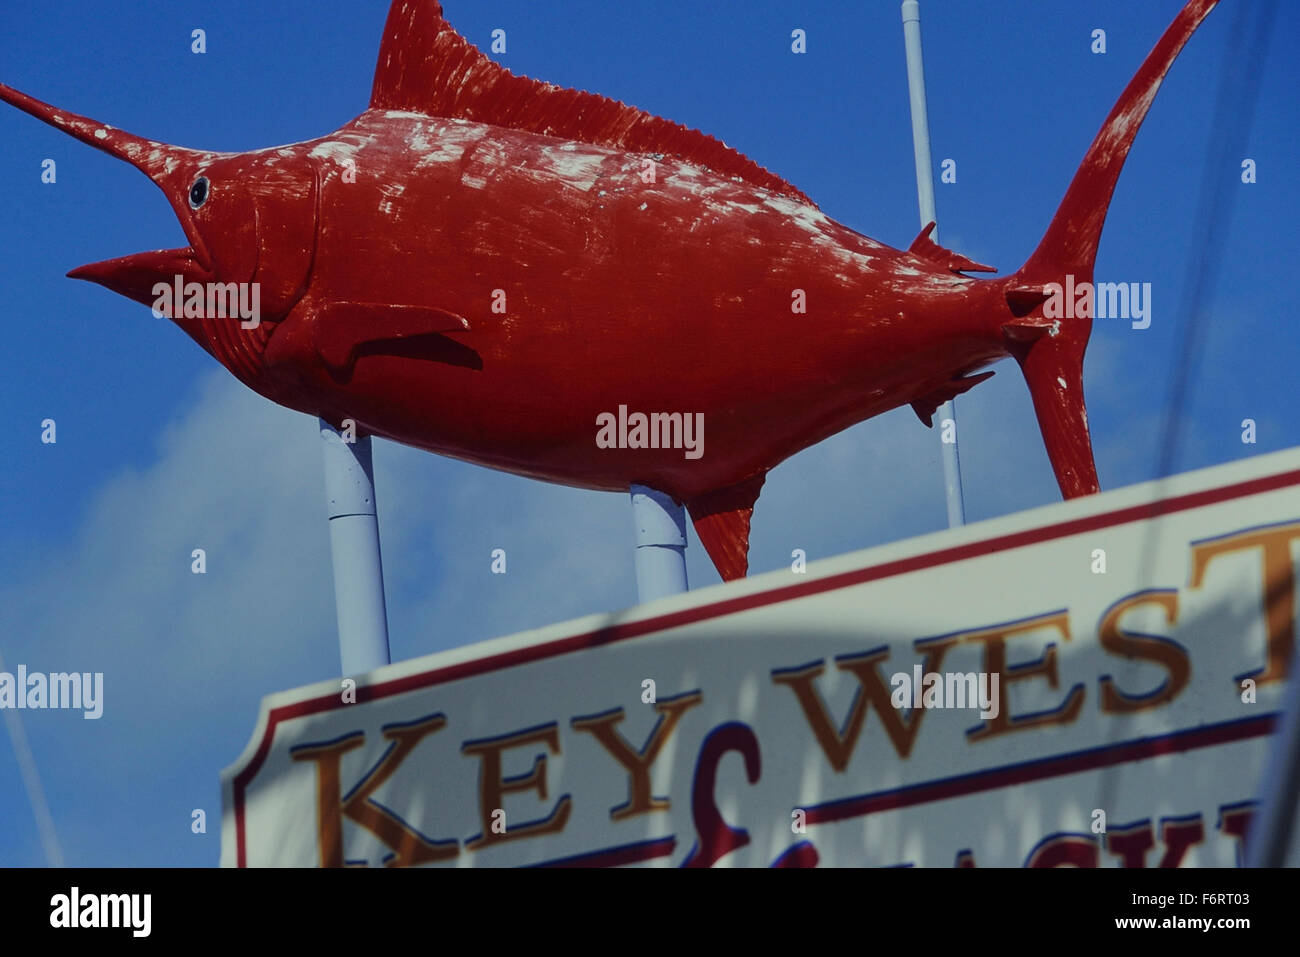 Red Marlin fish sign at the seaport district of Key West. Florida. USA Stock Photo